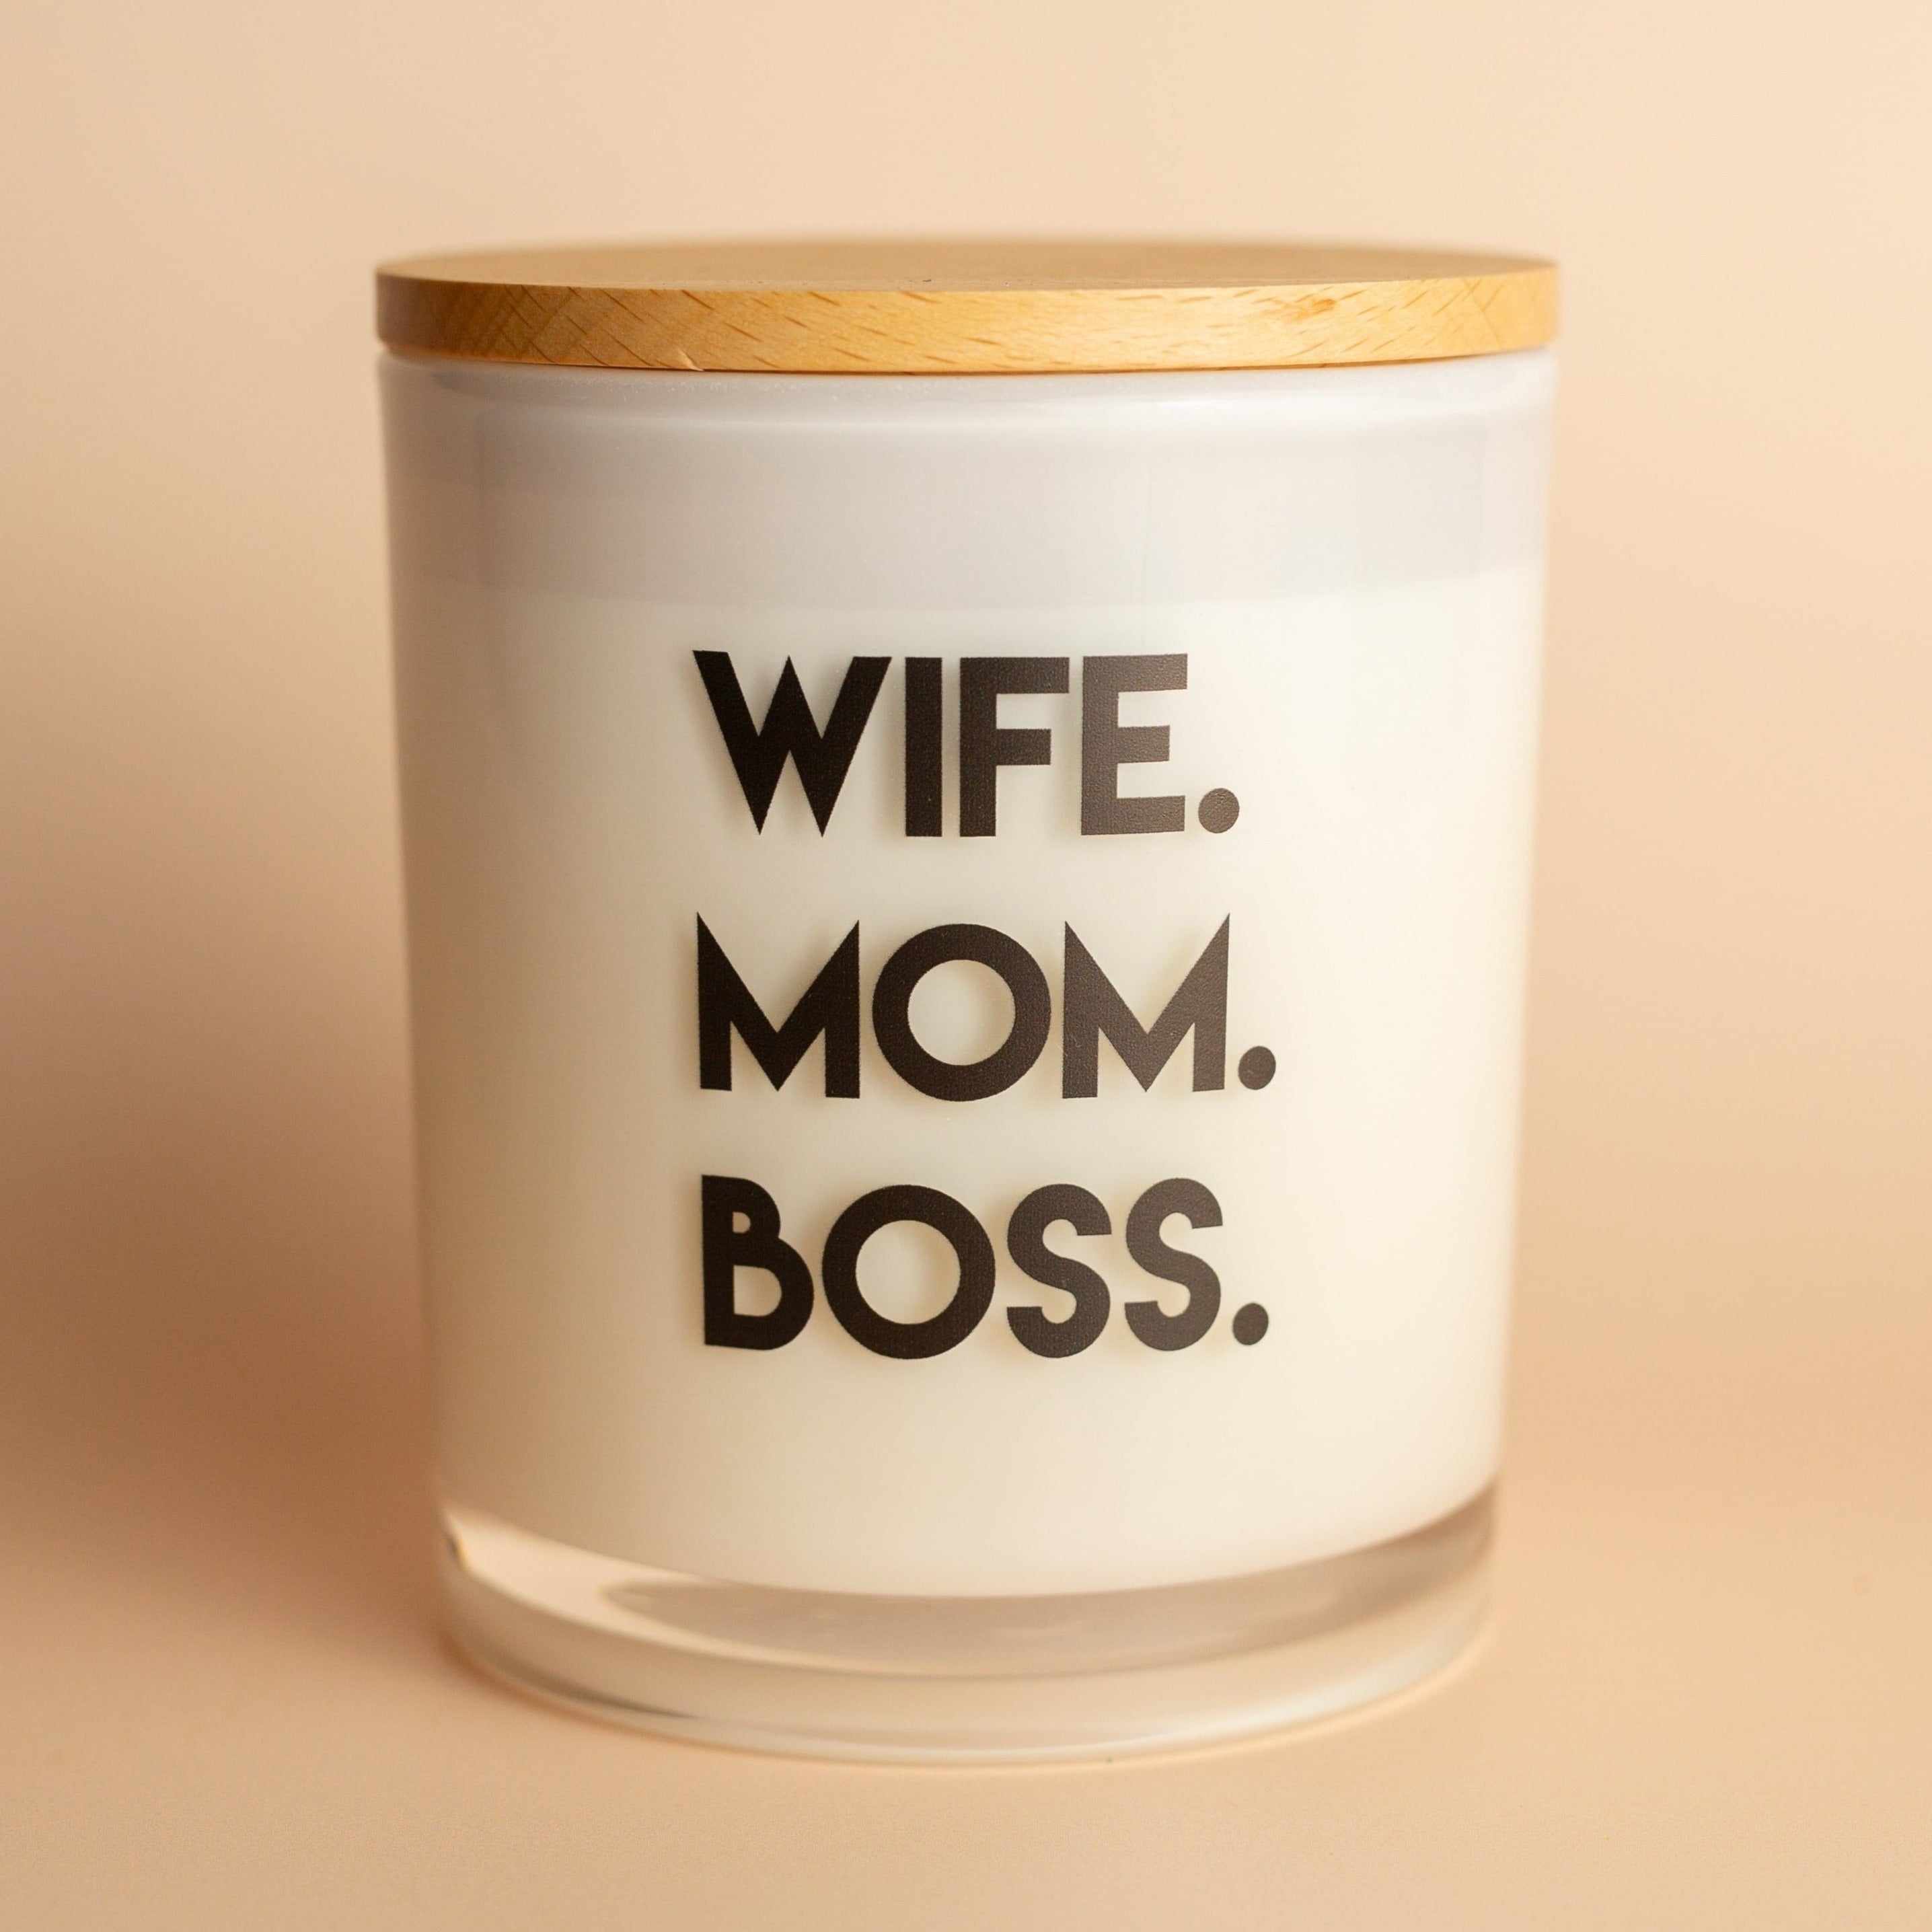 WIFE%20MOM%20BOSS%20CANDLE